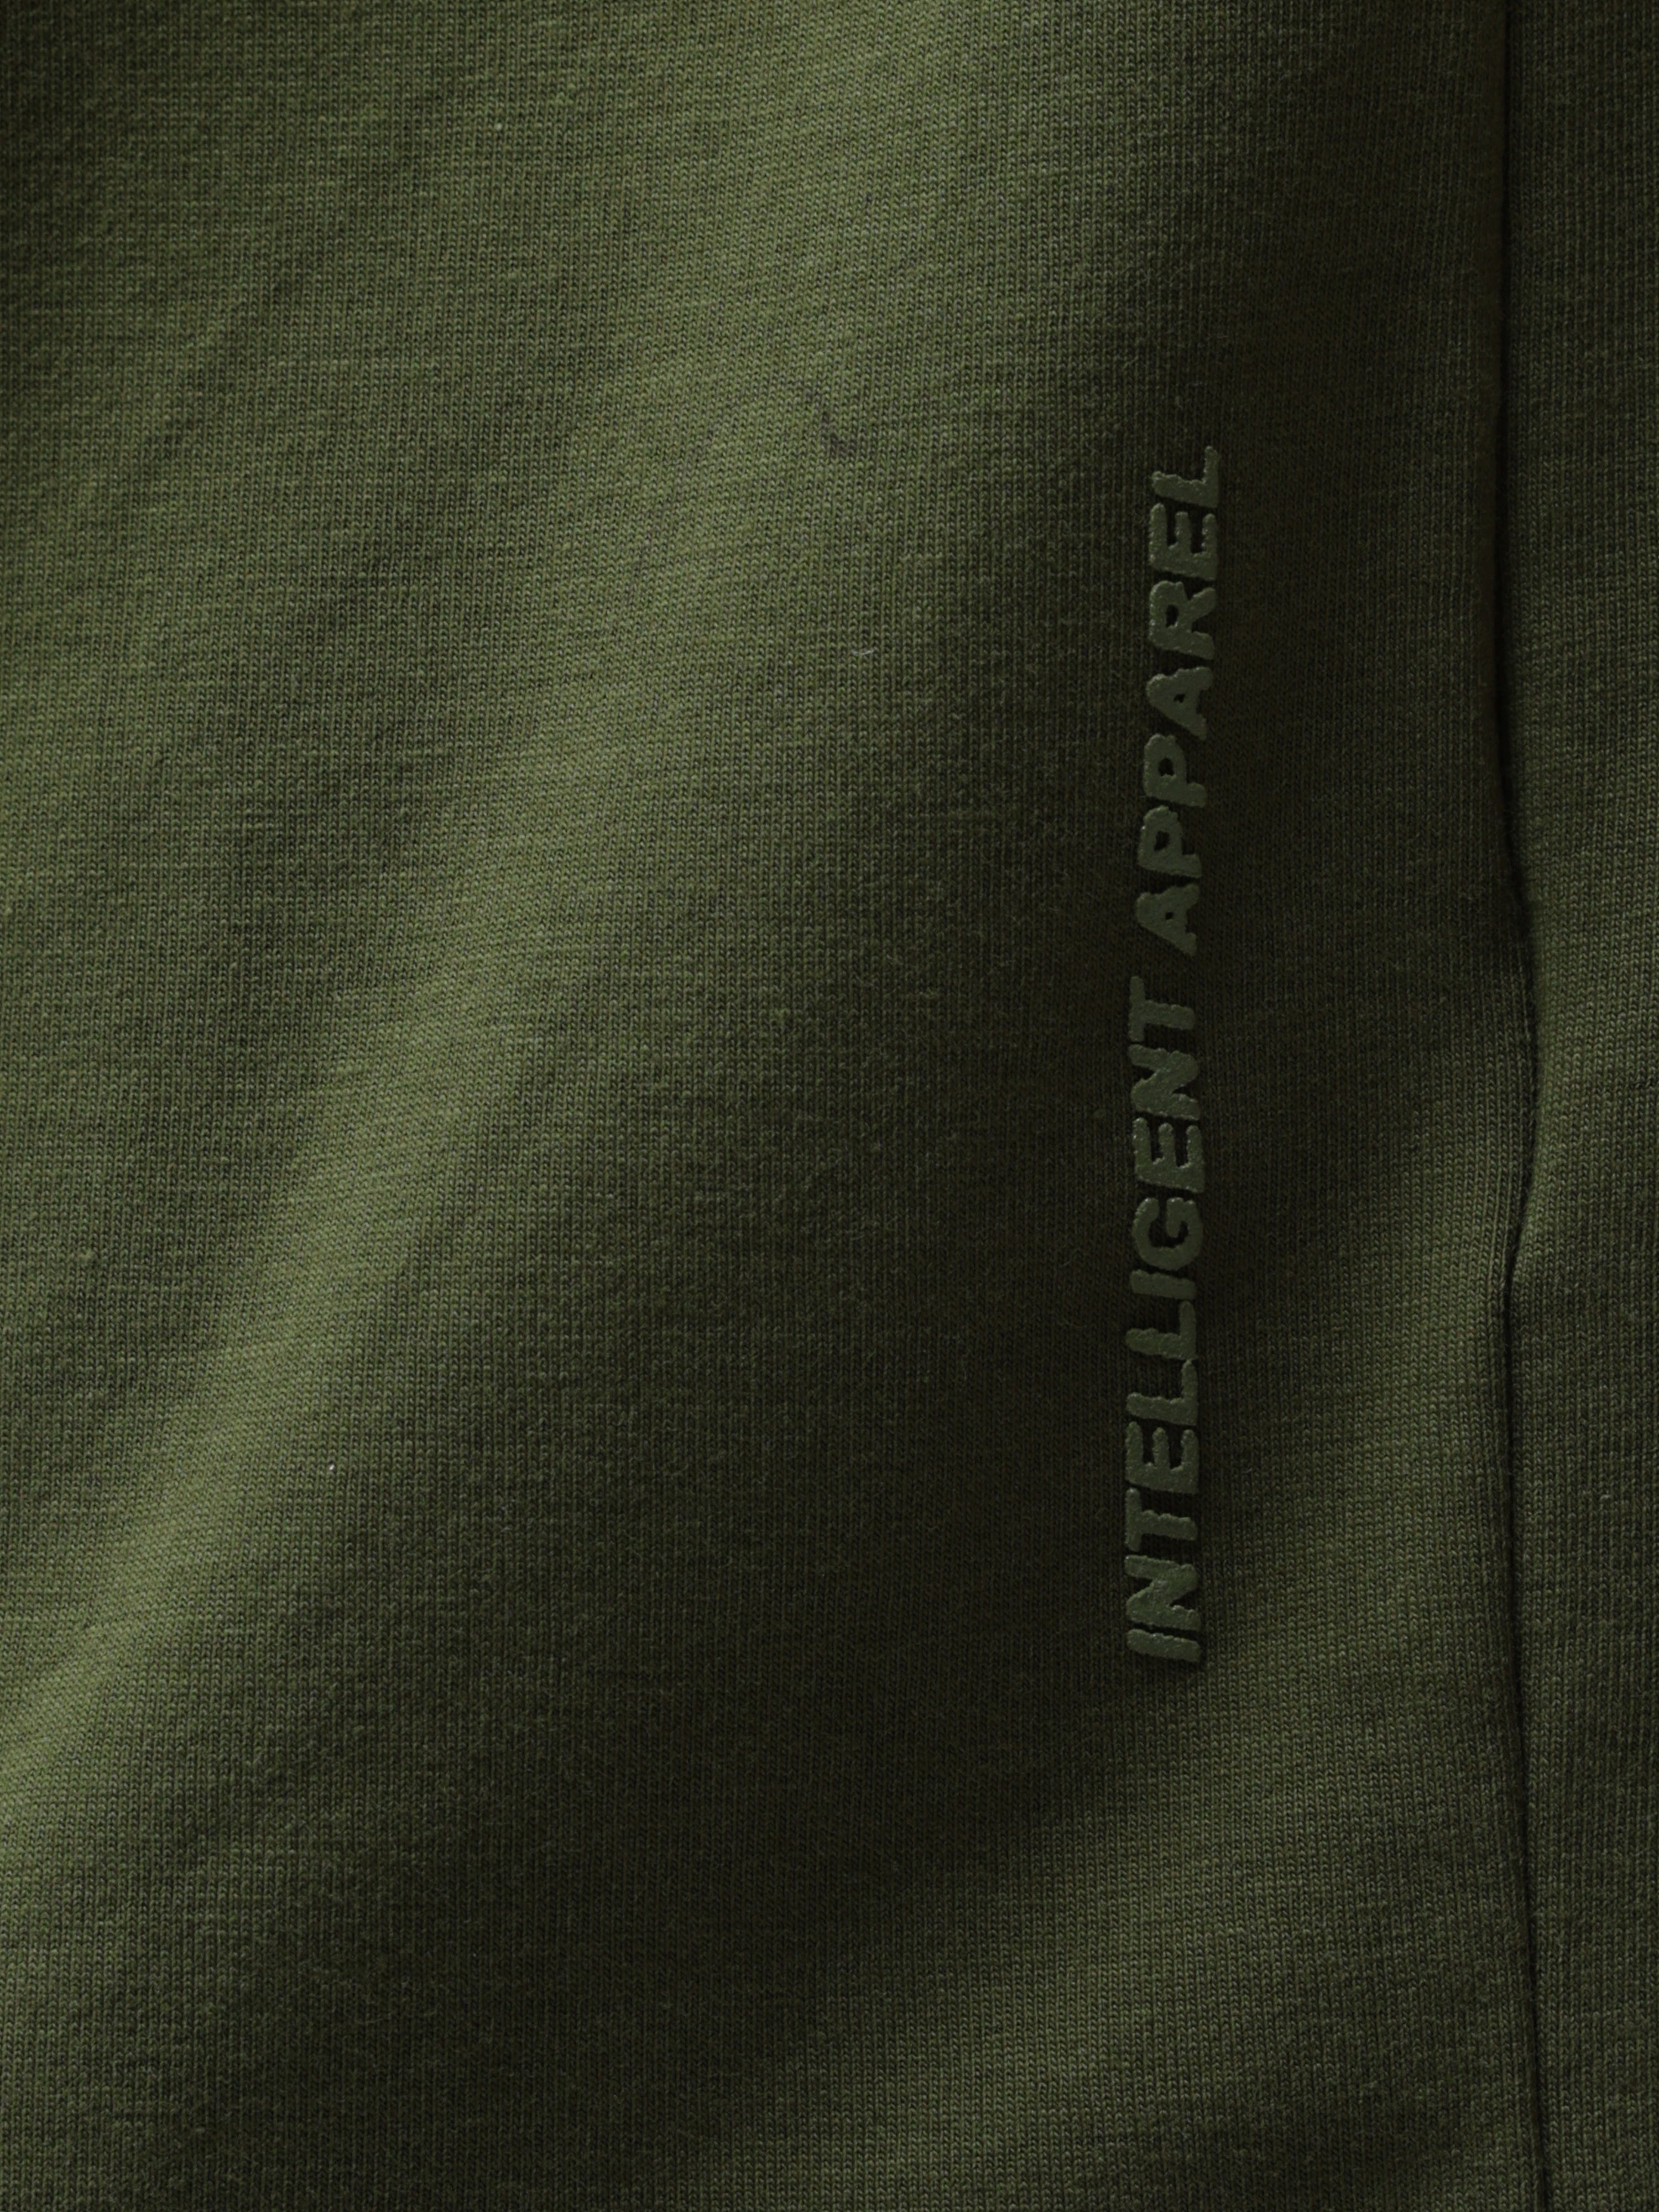 Olive green Turms round-neck T-shirt showcasing "Intelligent Apparel" detail, stain-proof, water-resistant, premium cotton blend fabric.